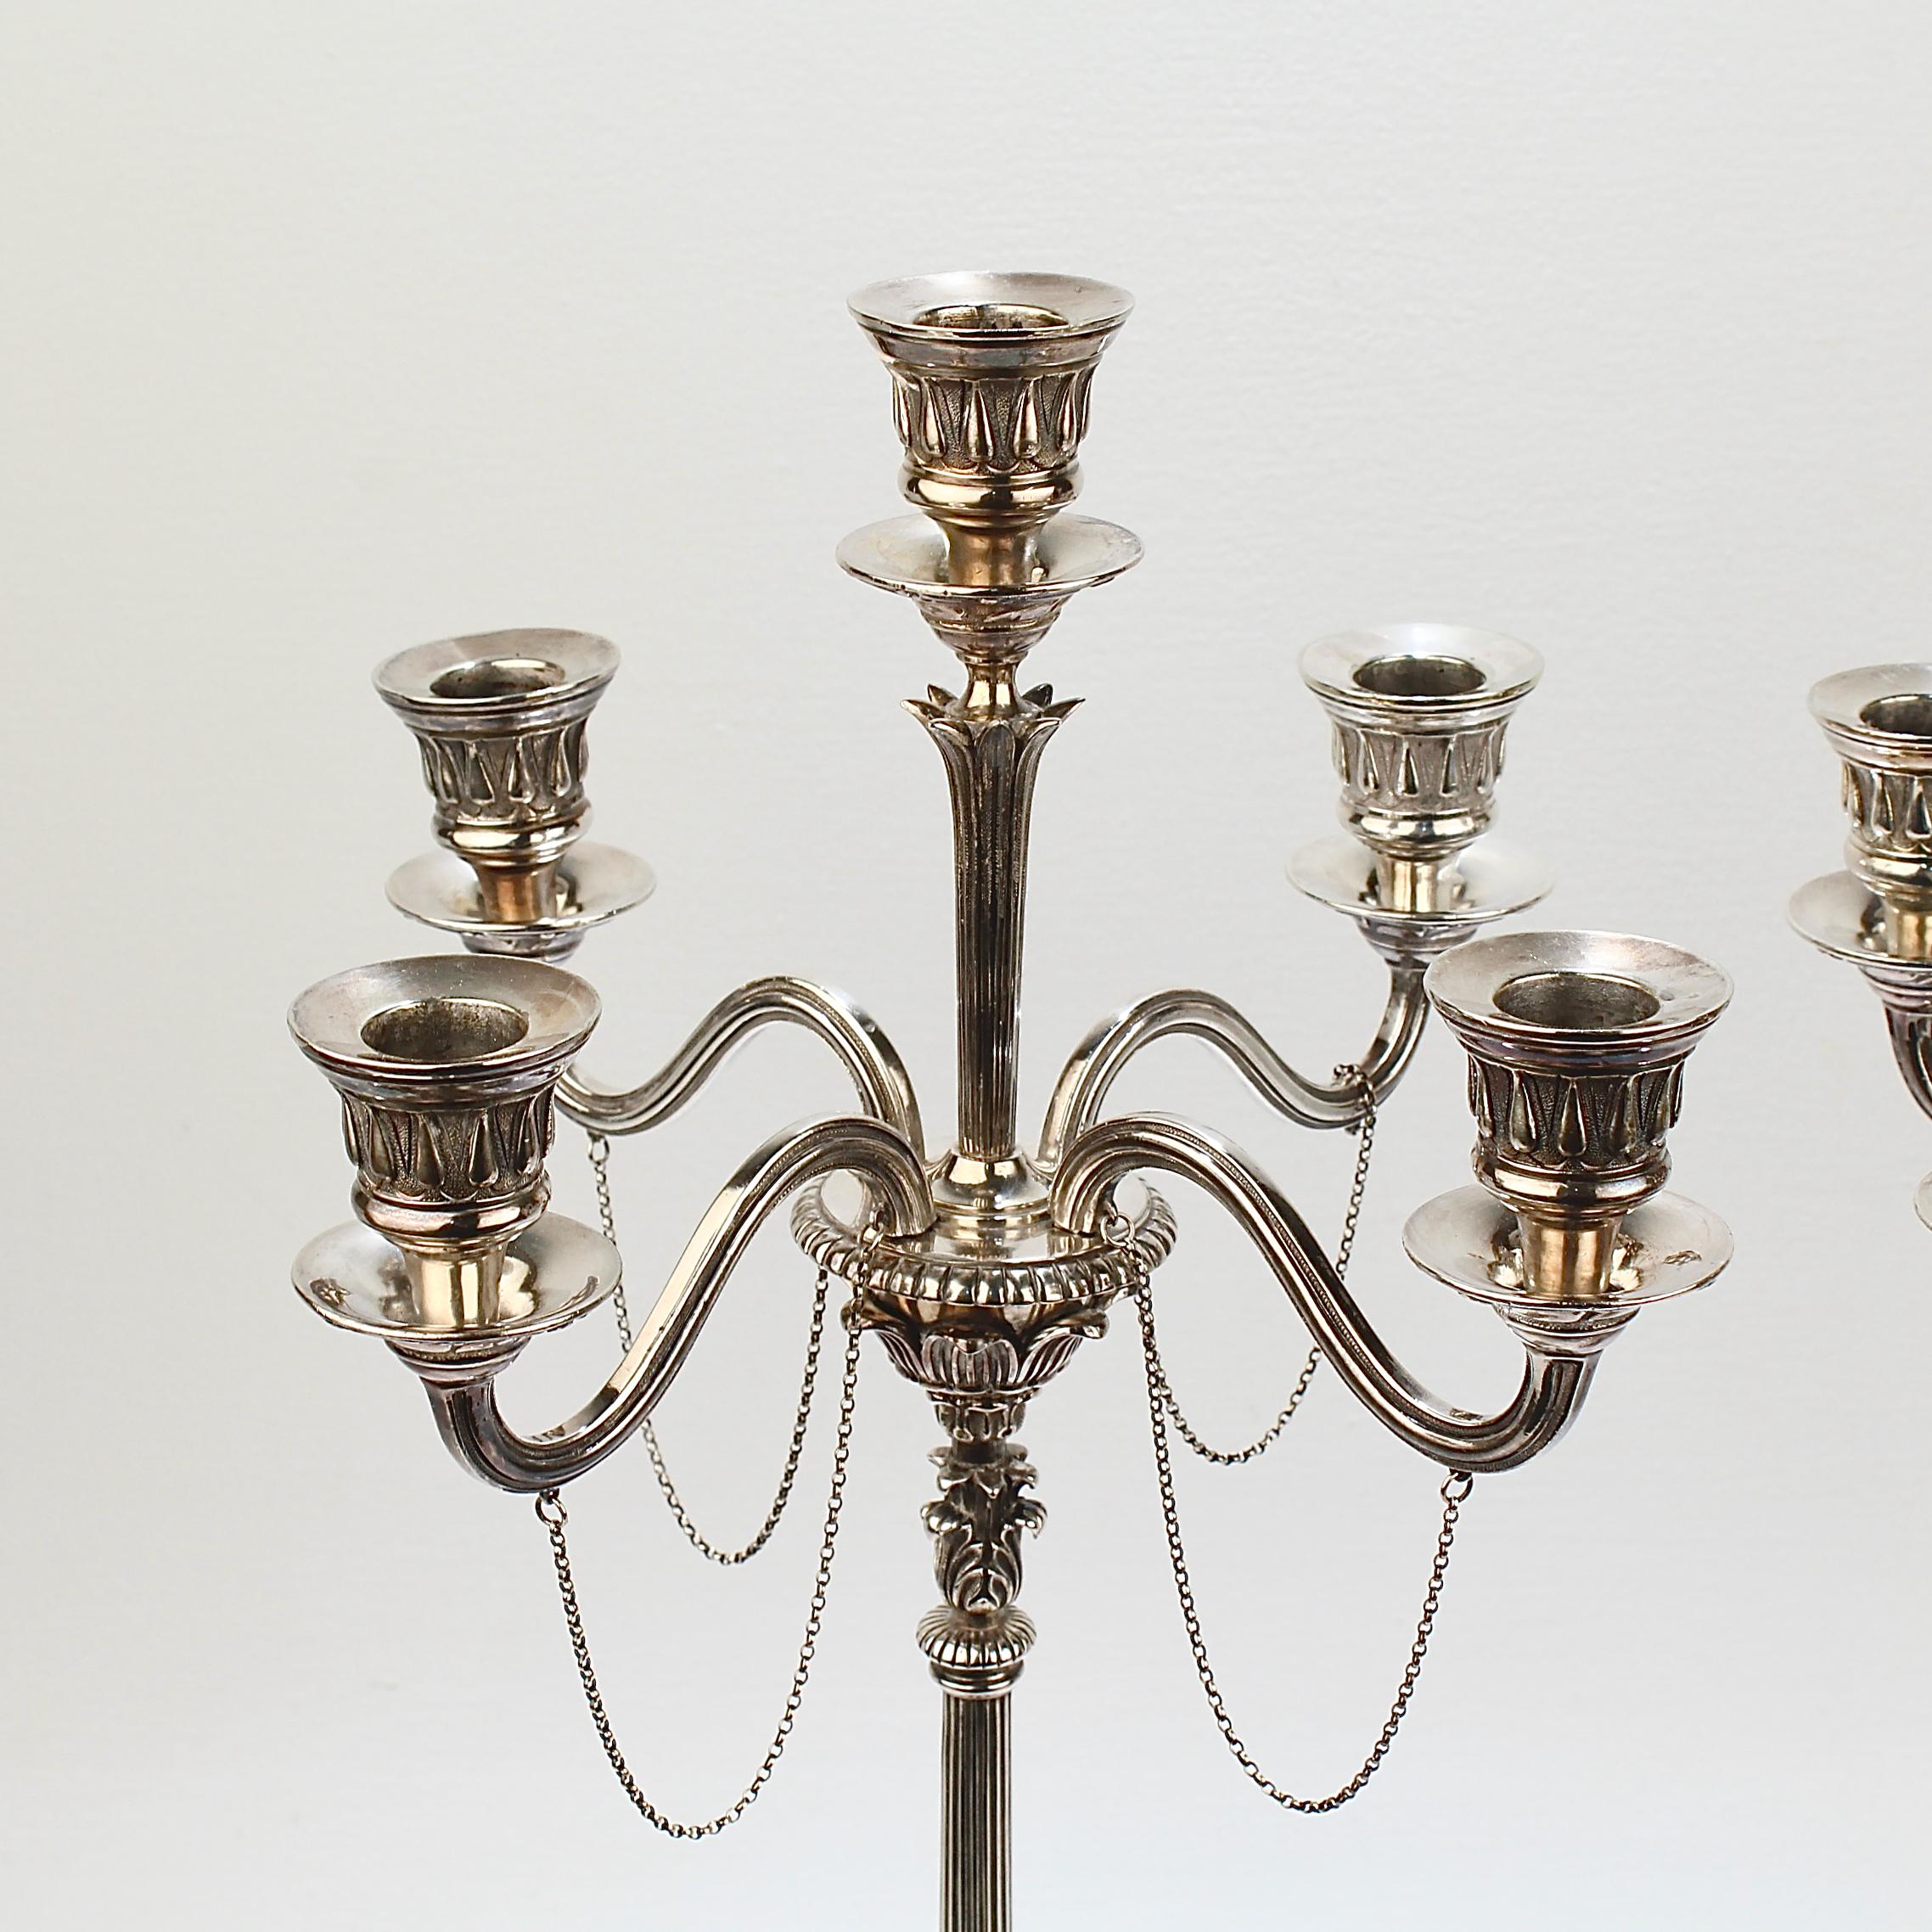 Pair of Elkington & Co Neoclassical Revival Silver Plated Five-Light Candelabra For Sale 5